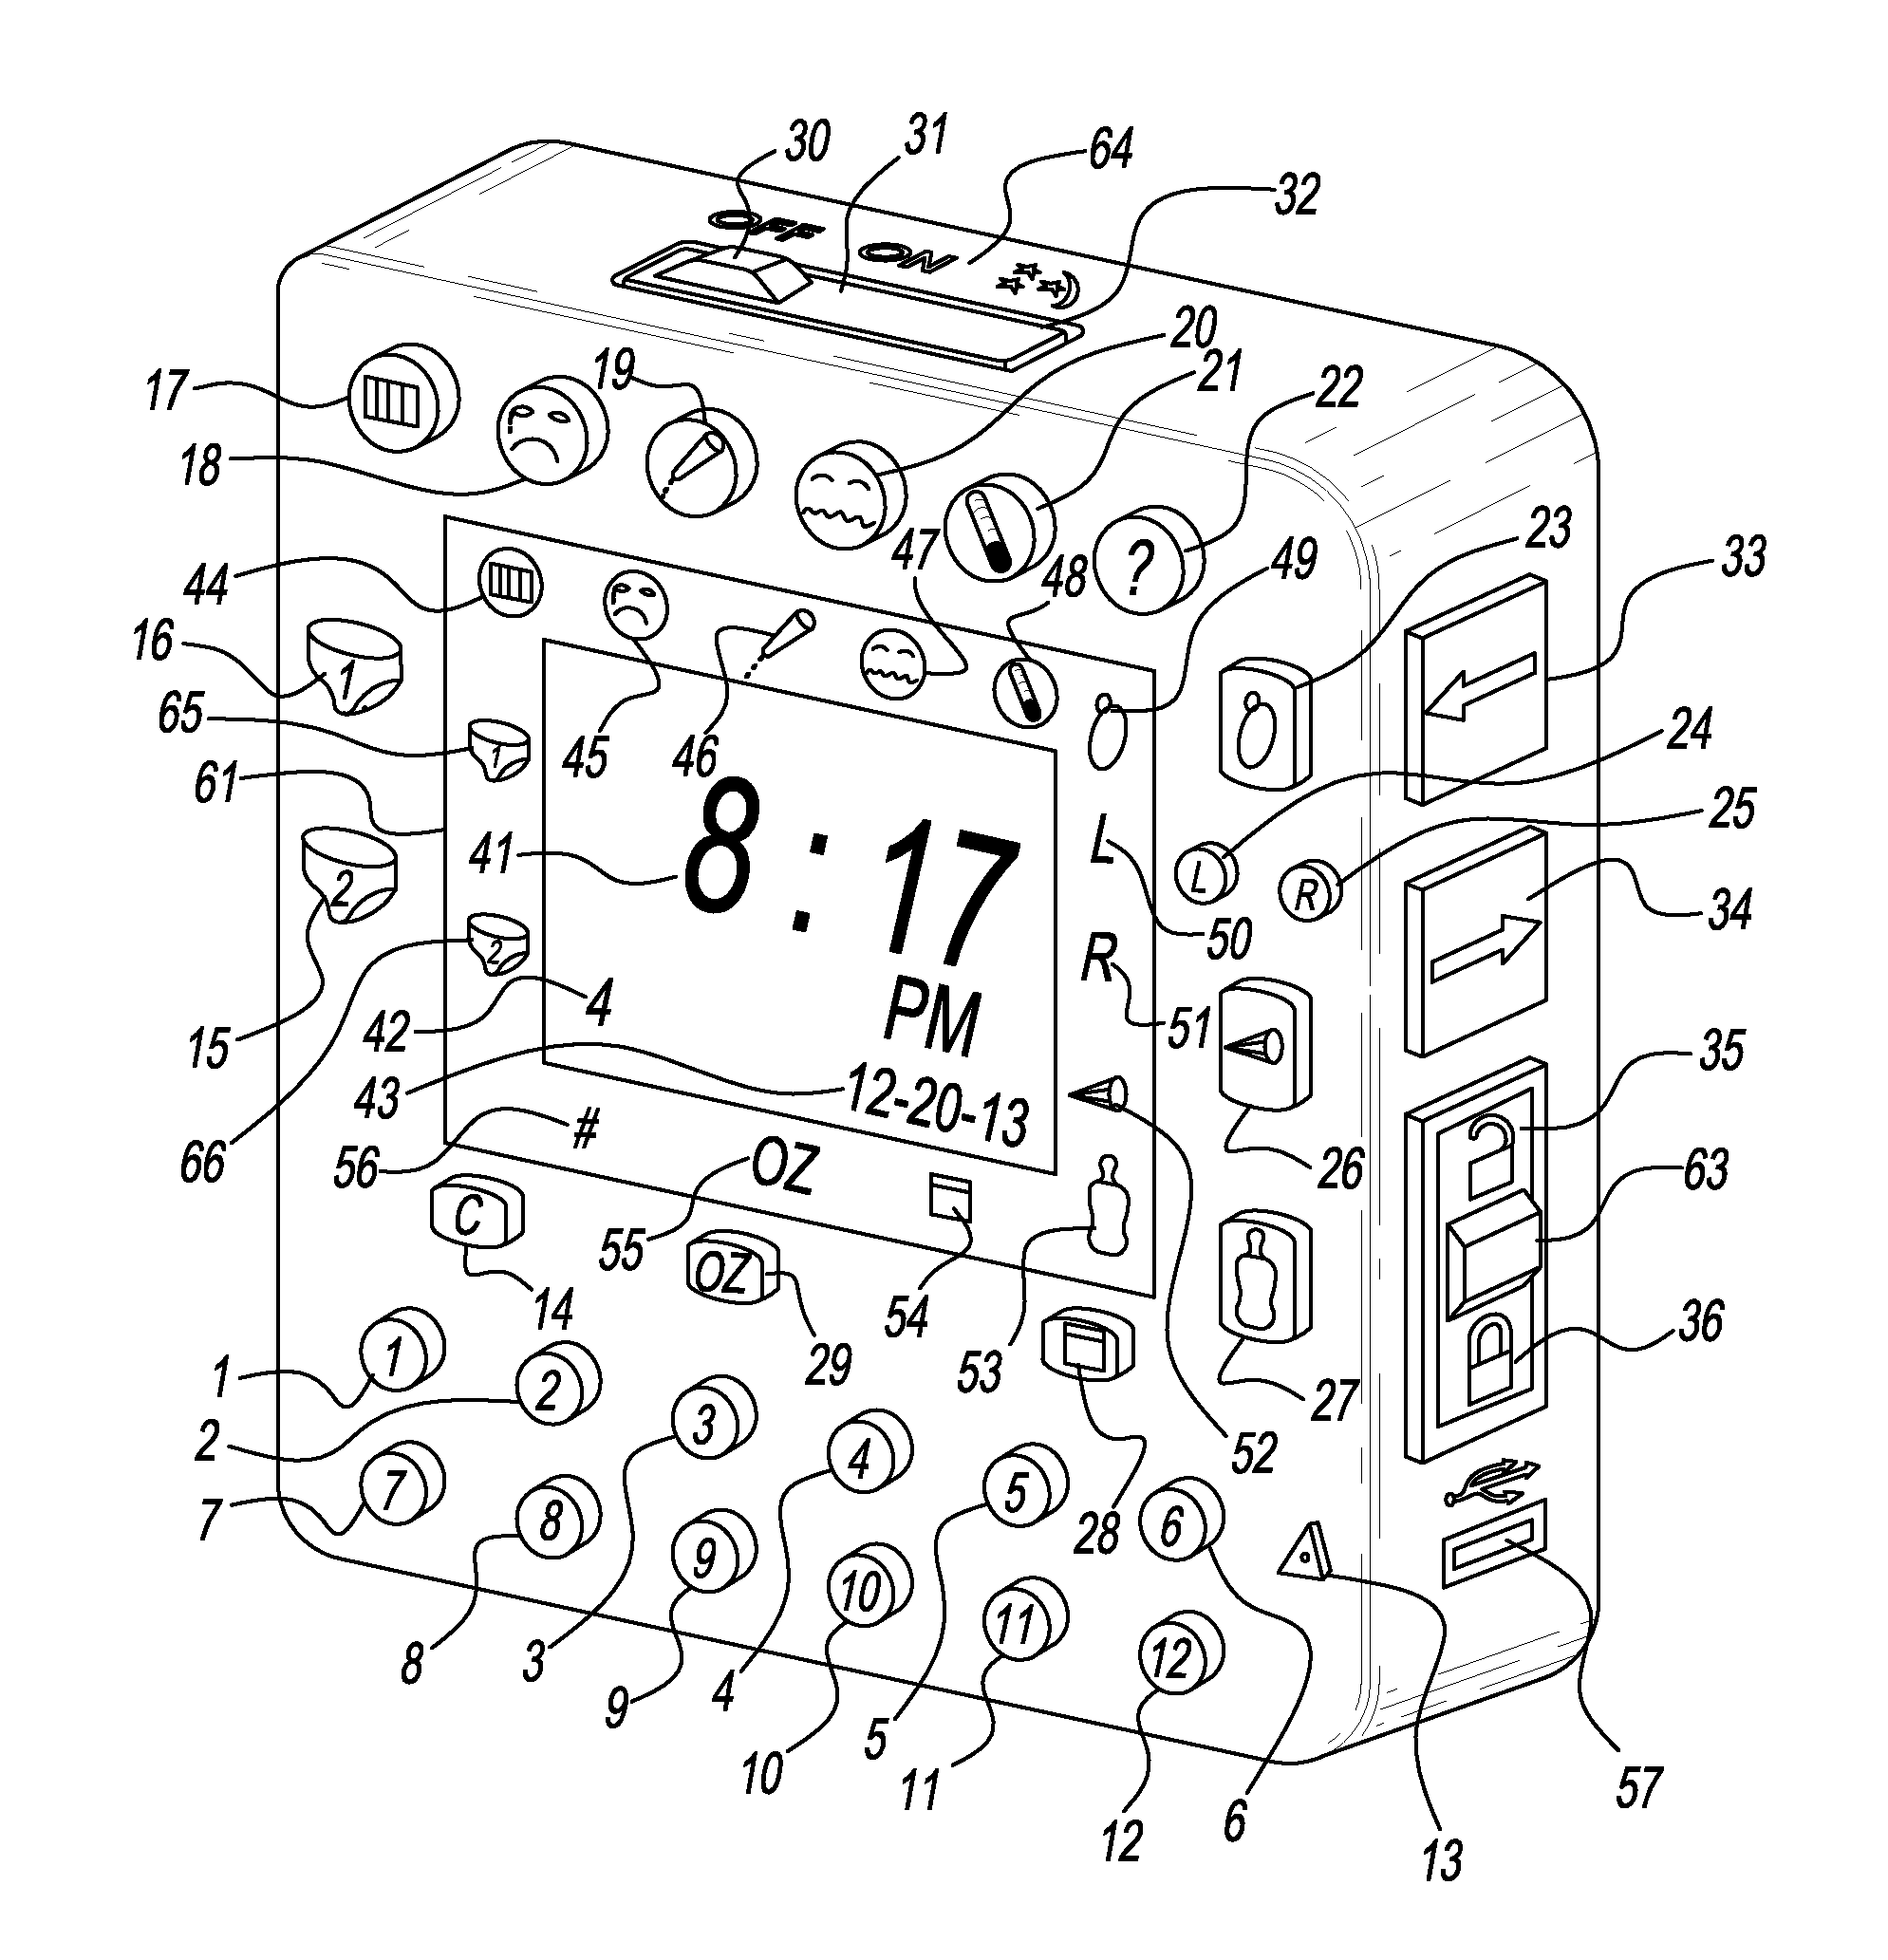 Multi-Event Time and Data Tracking Device